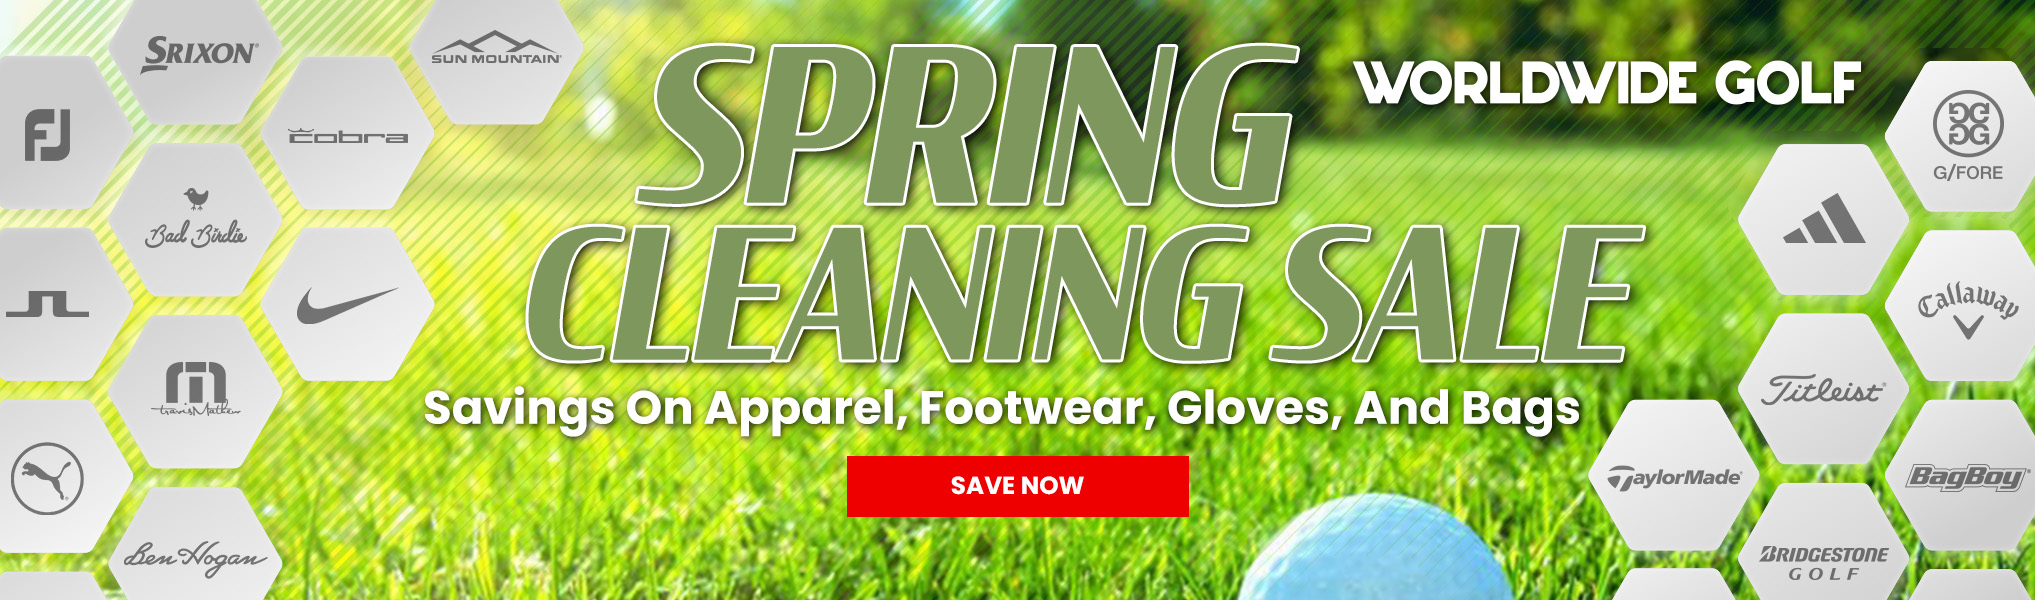 Save Big on Golf Apparel and Equipment